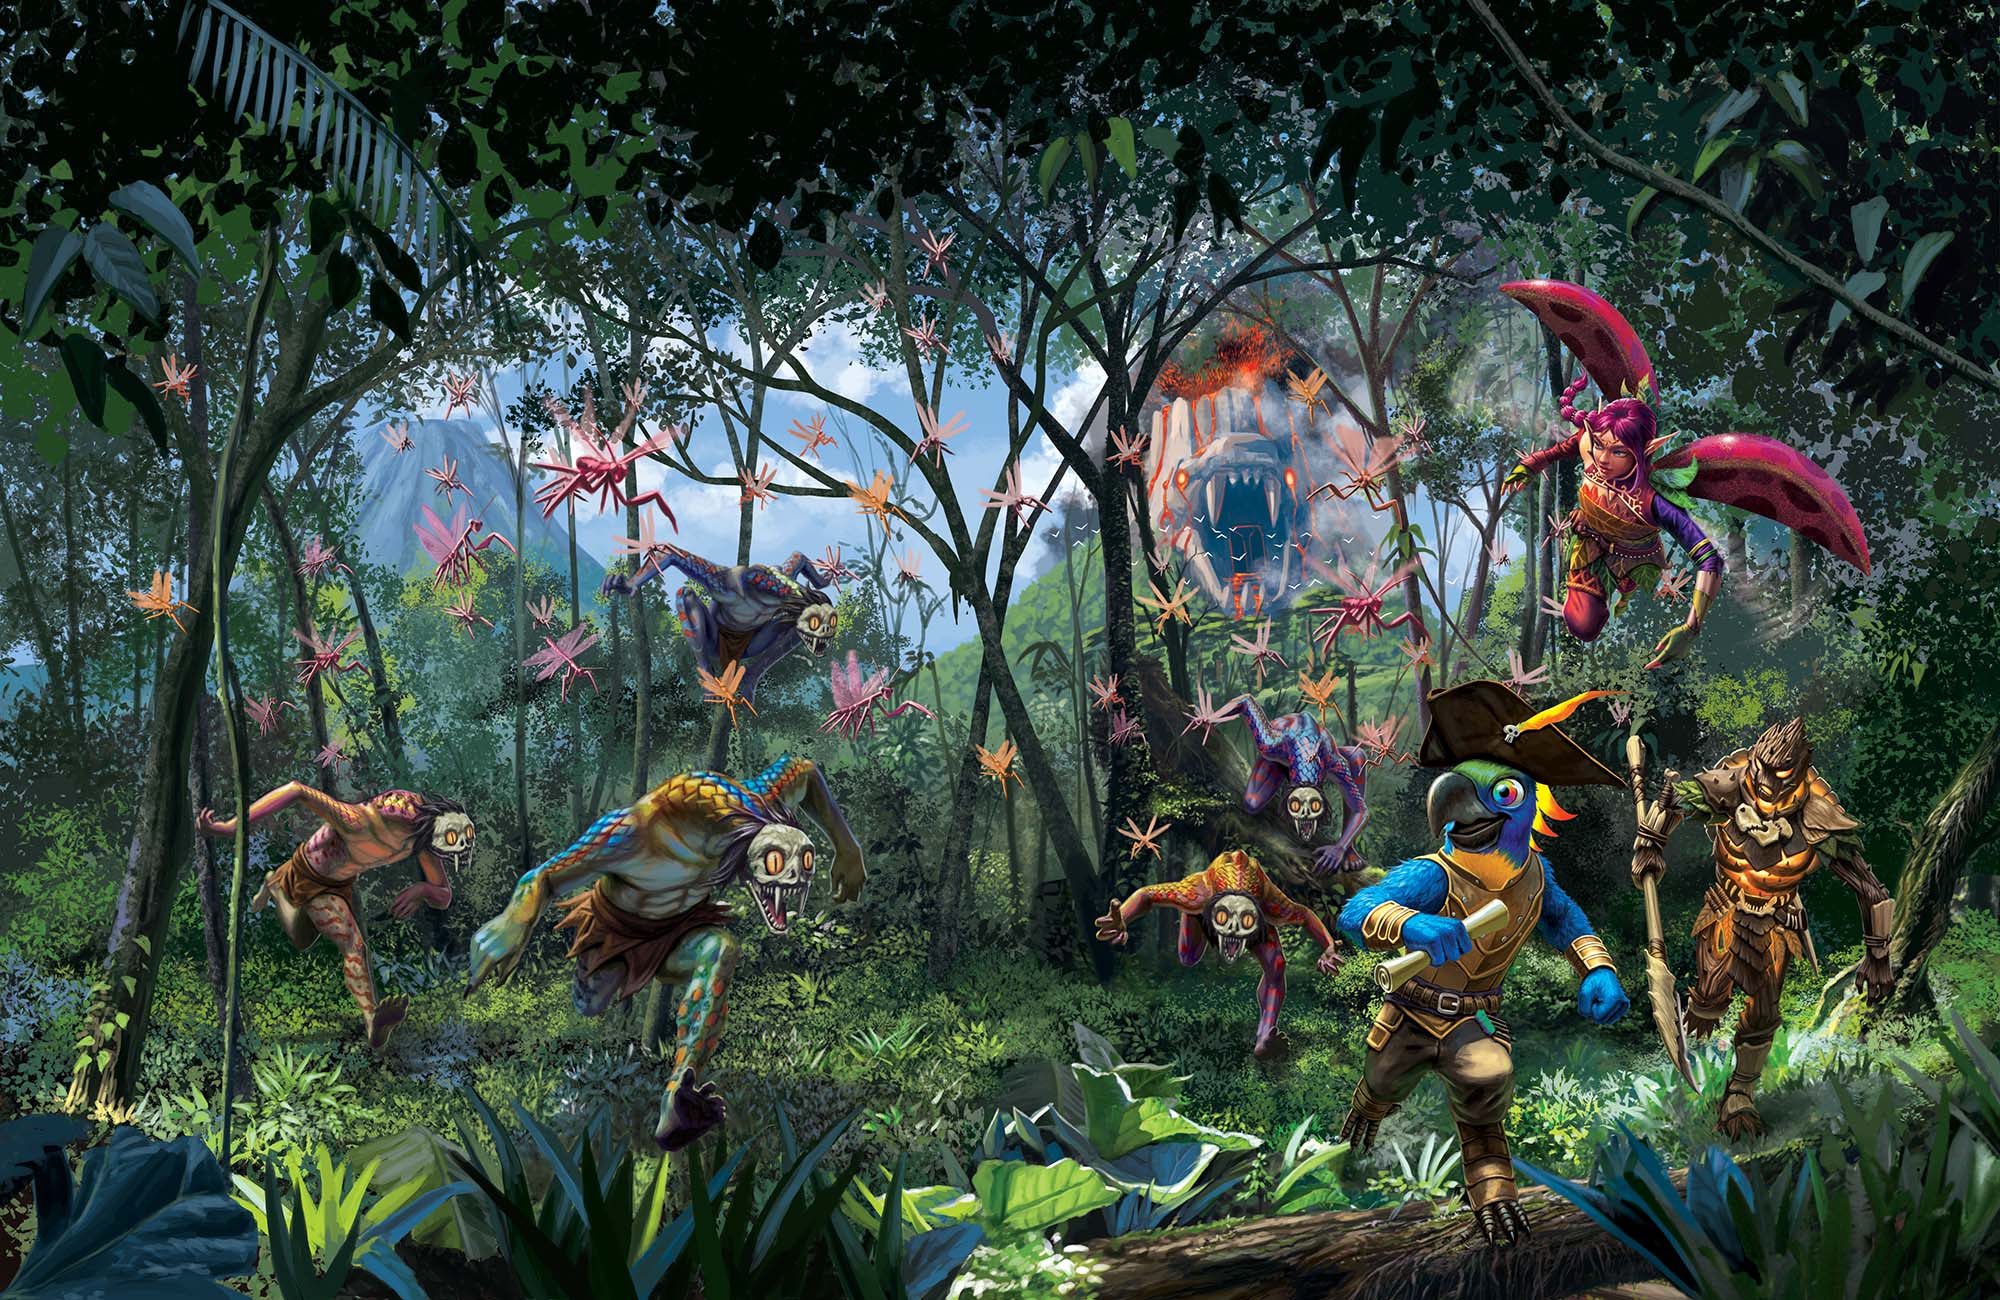 Adventurers run through a dense jungle from a number of different monsters